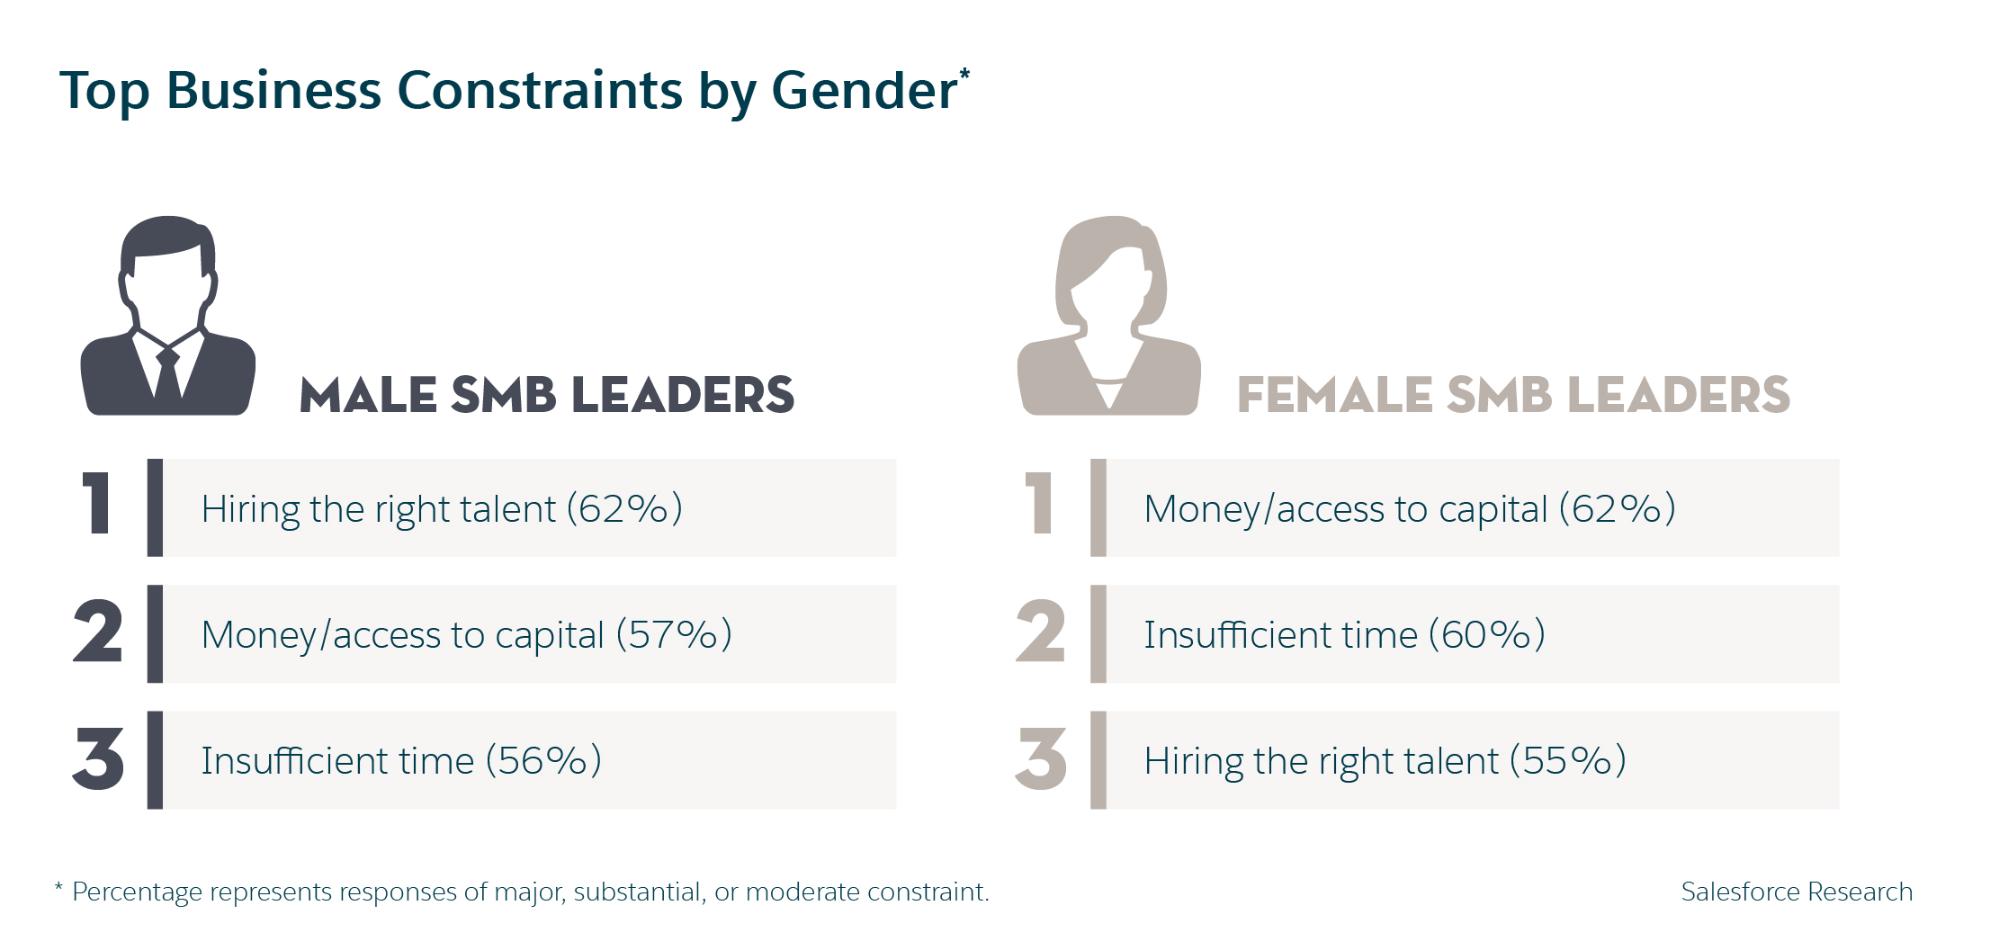 Top business constraints by gender